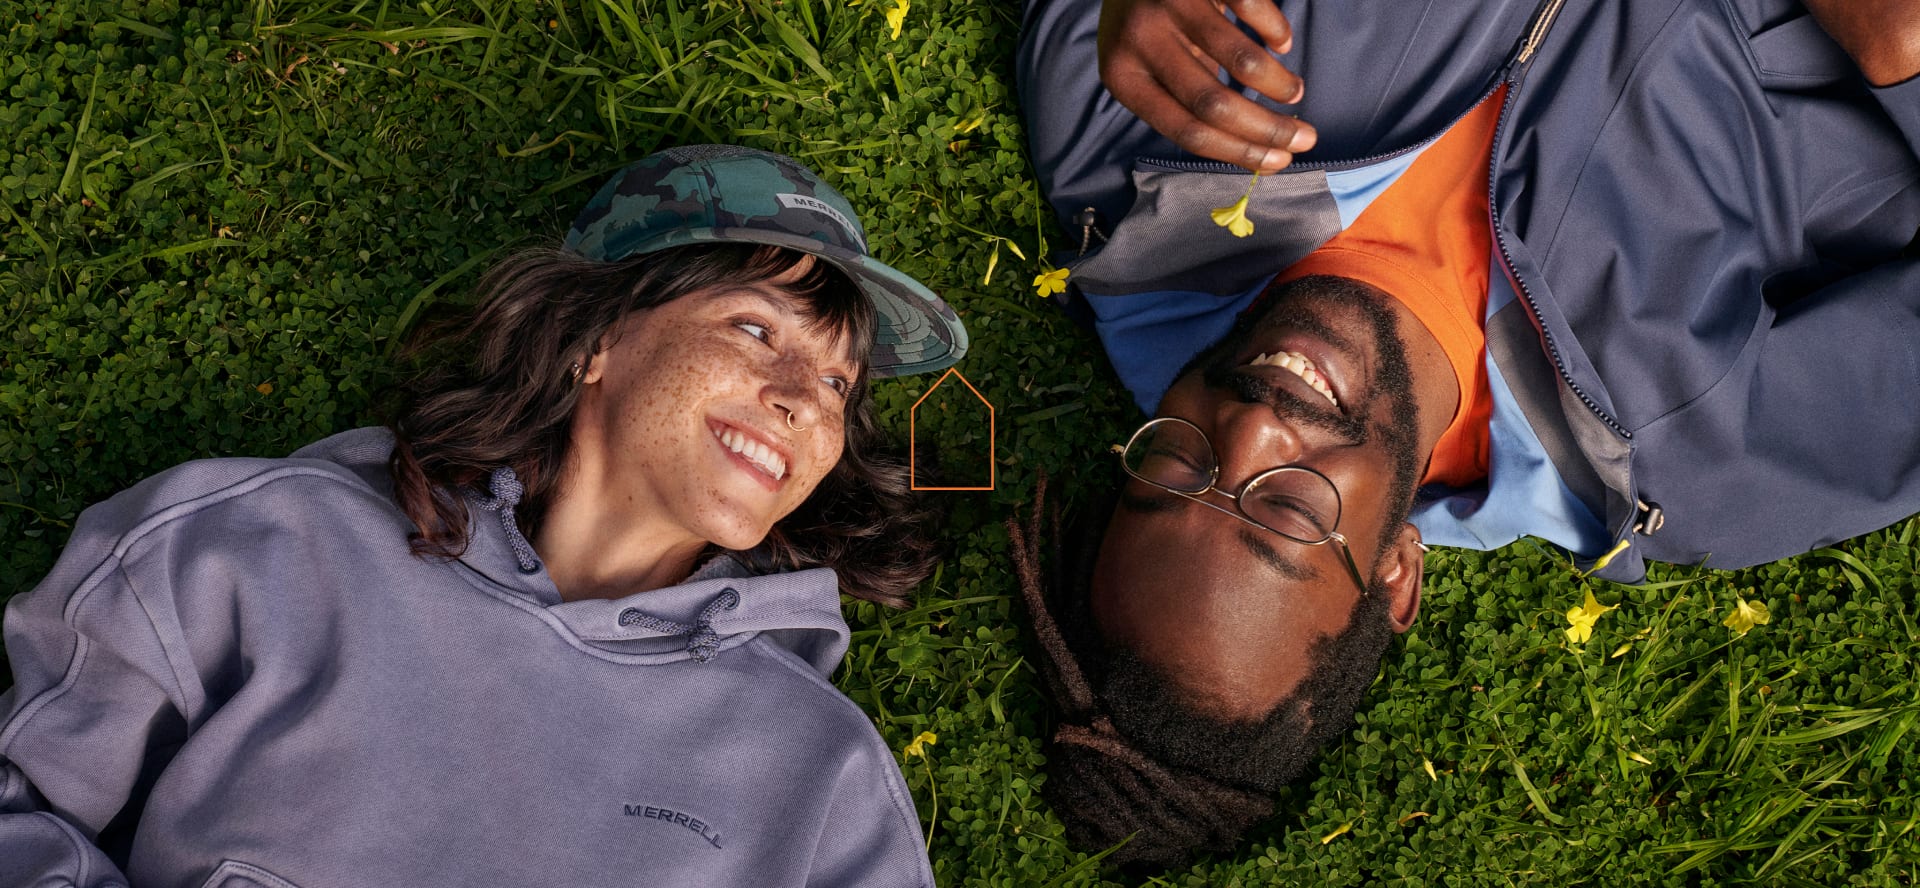 Two people laying together in the grass looking happy. One is holding a clover.